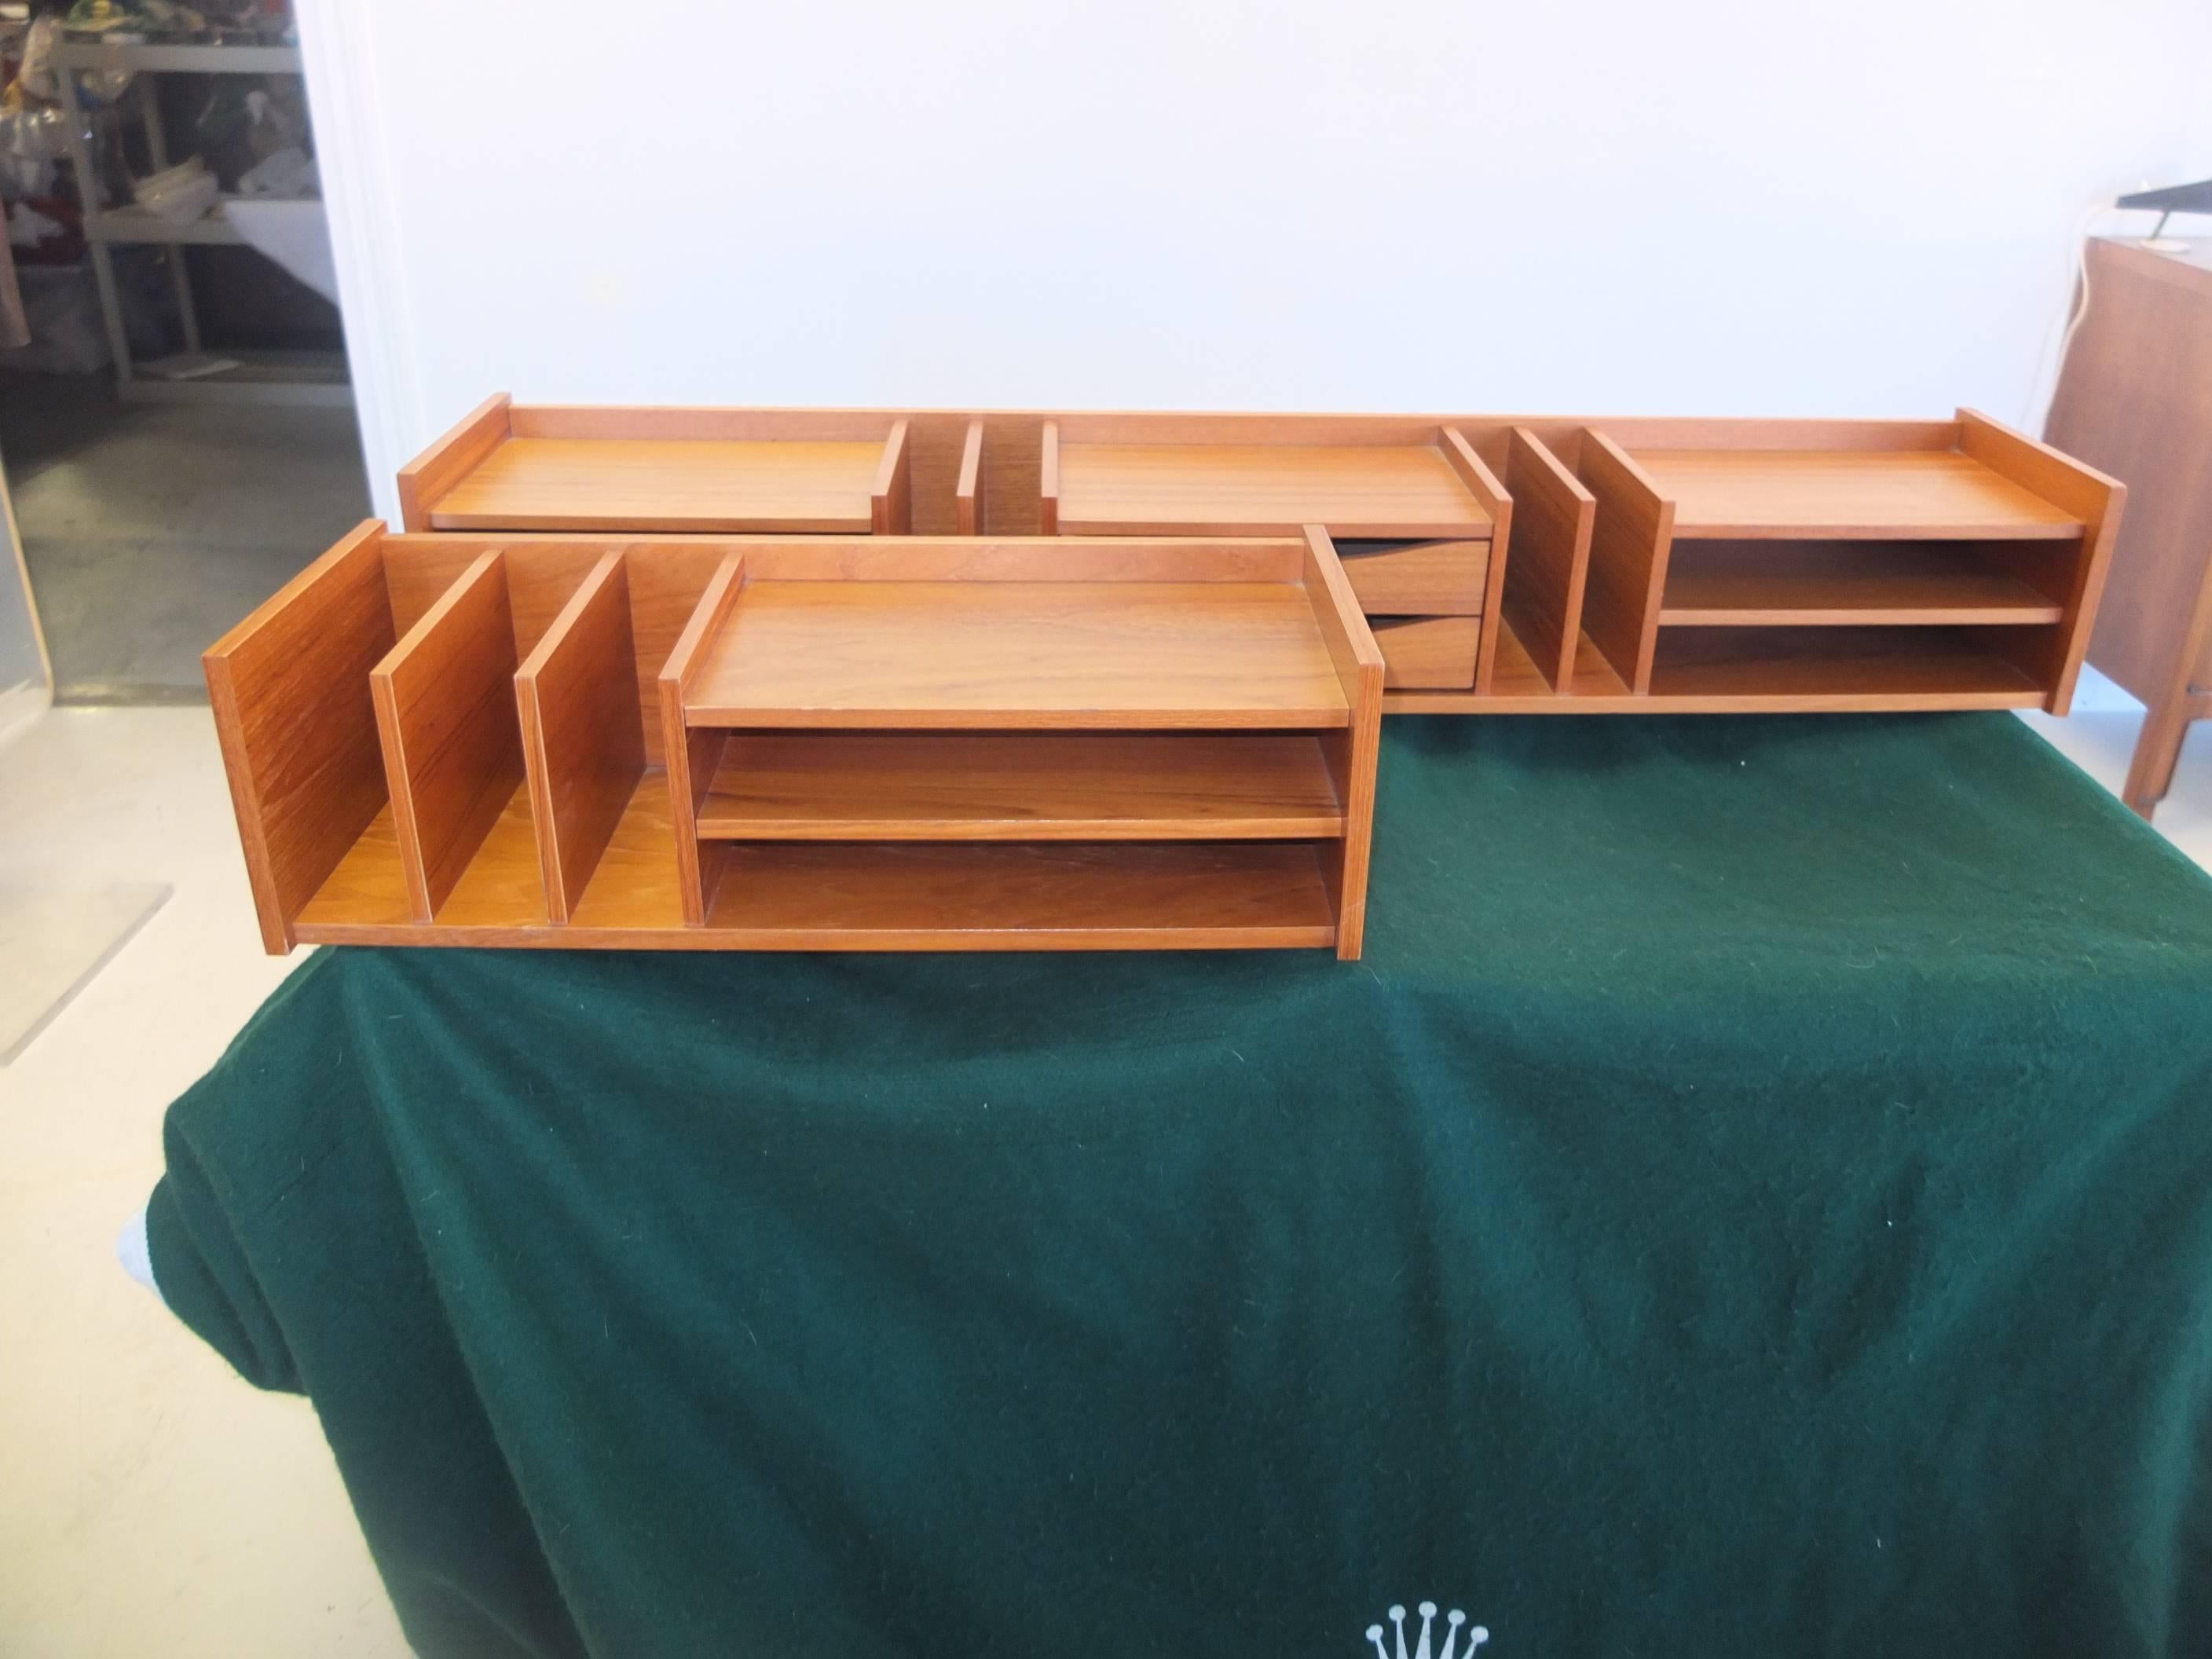 Part of the SelectForm series by Georg Petersen Mobilfabrik of Denmark, two separate teak desktop organizers with flat file sections, drawers and vertical file sections. Beautiful wood grain and easily moveable.

Price shown is for both